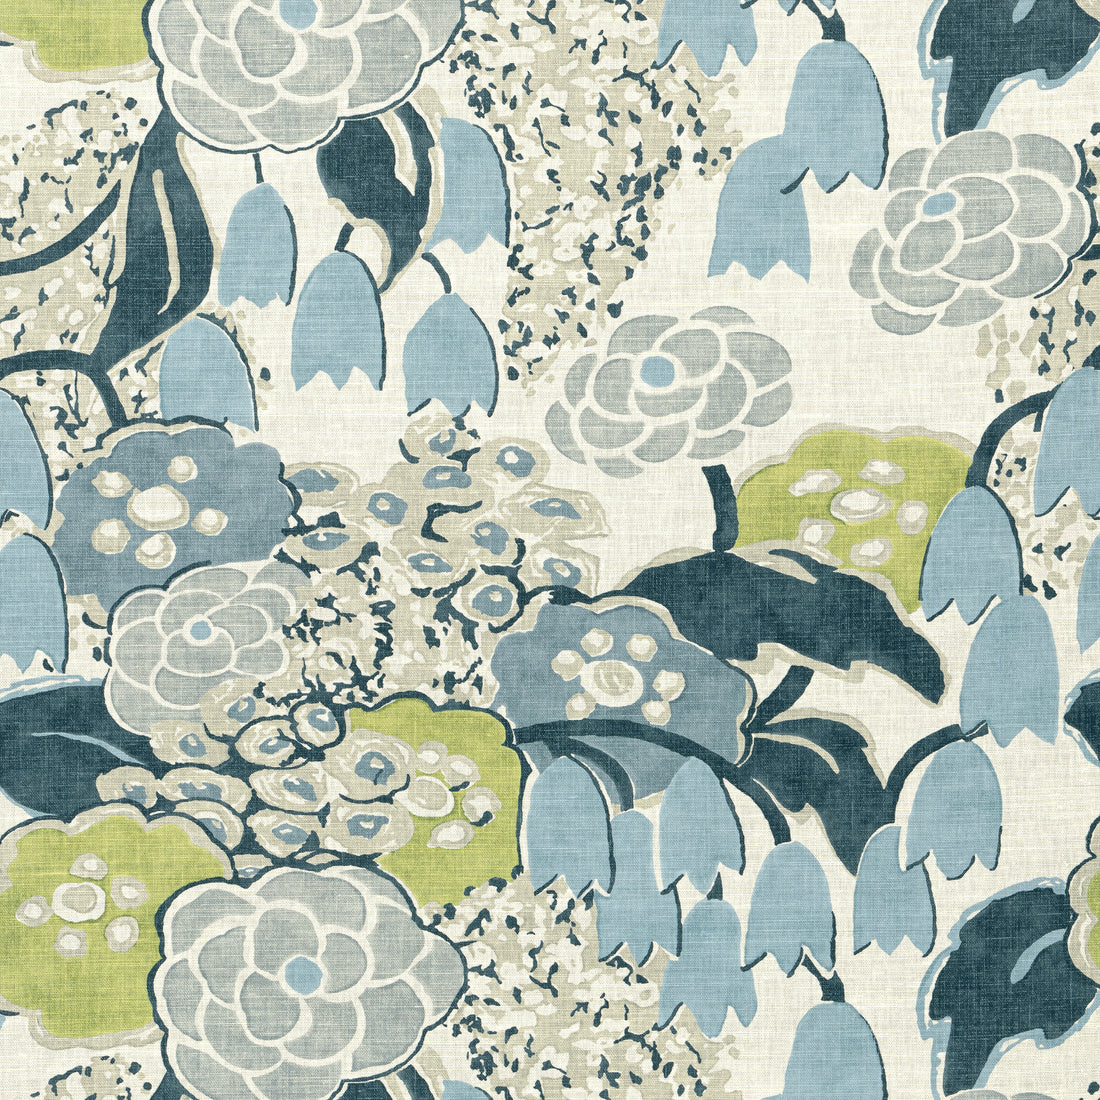 Laura fabric in citrus and blue color - pattern number AF23104 - by Anna French in the Willow Tree collection